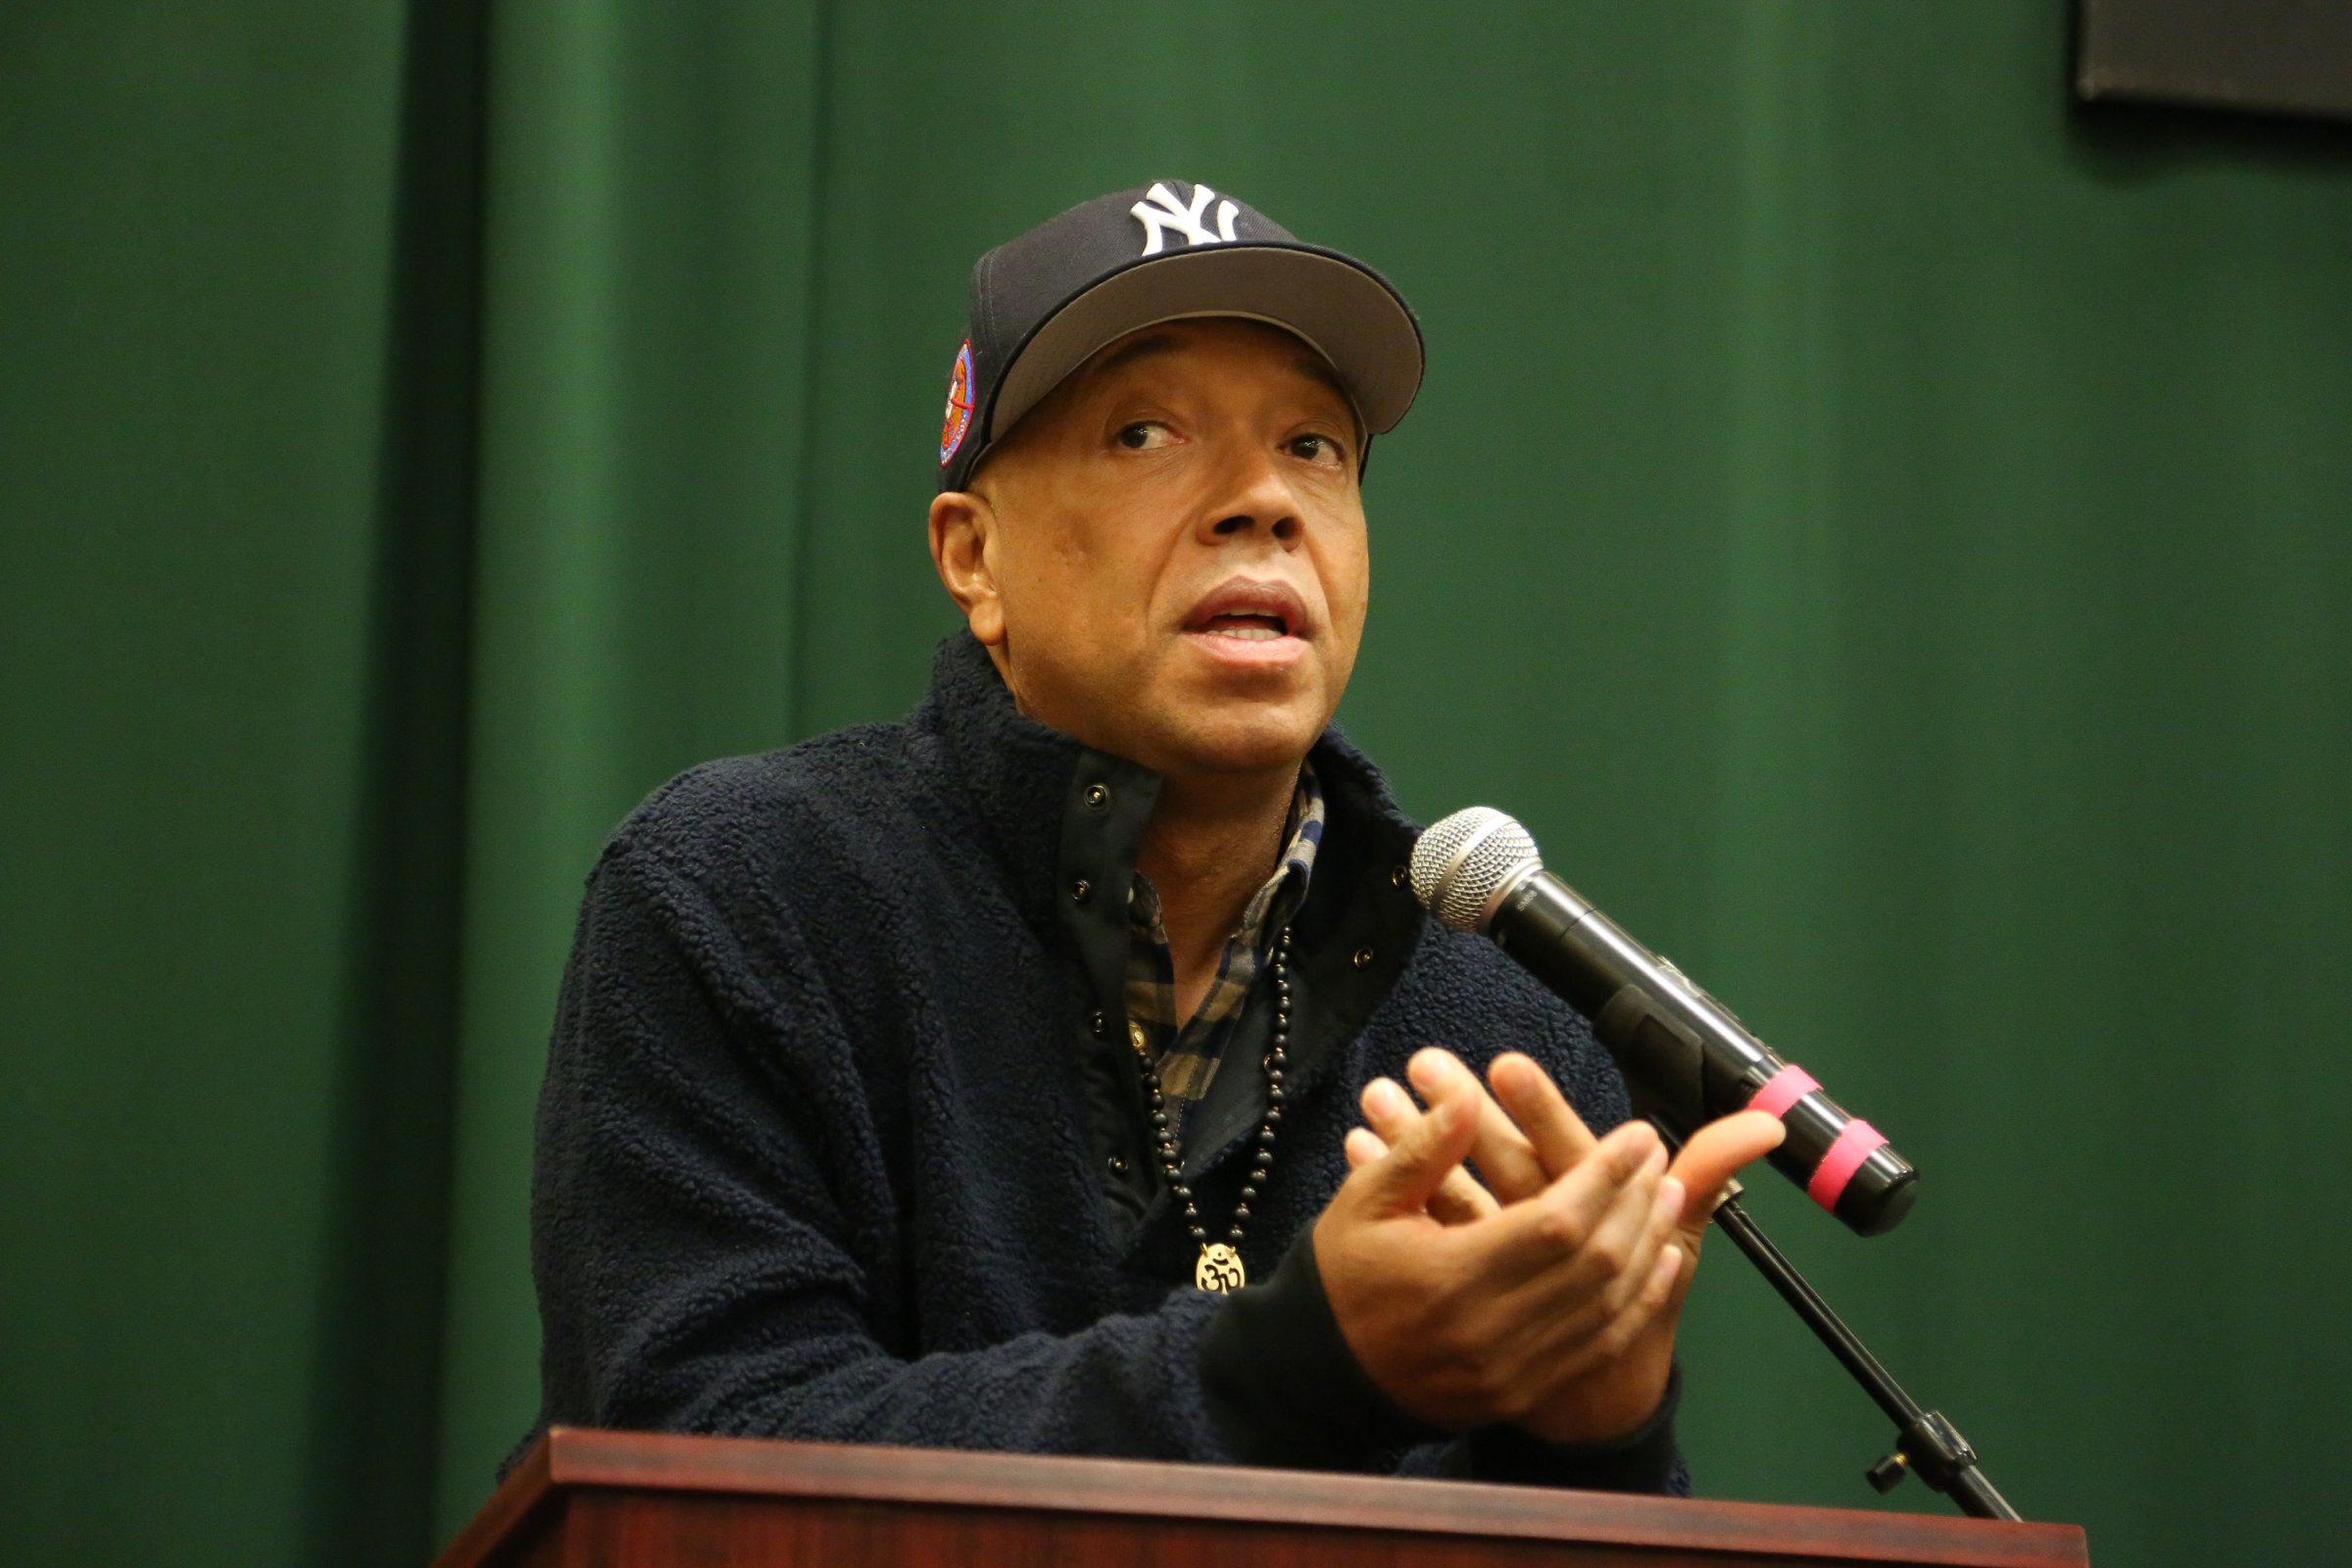 Russell Simmons Signs Copies Of His New Book "The Happy Vegan: A Guide To Living A Long, Healthy, and Successful Life"